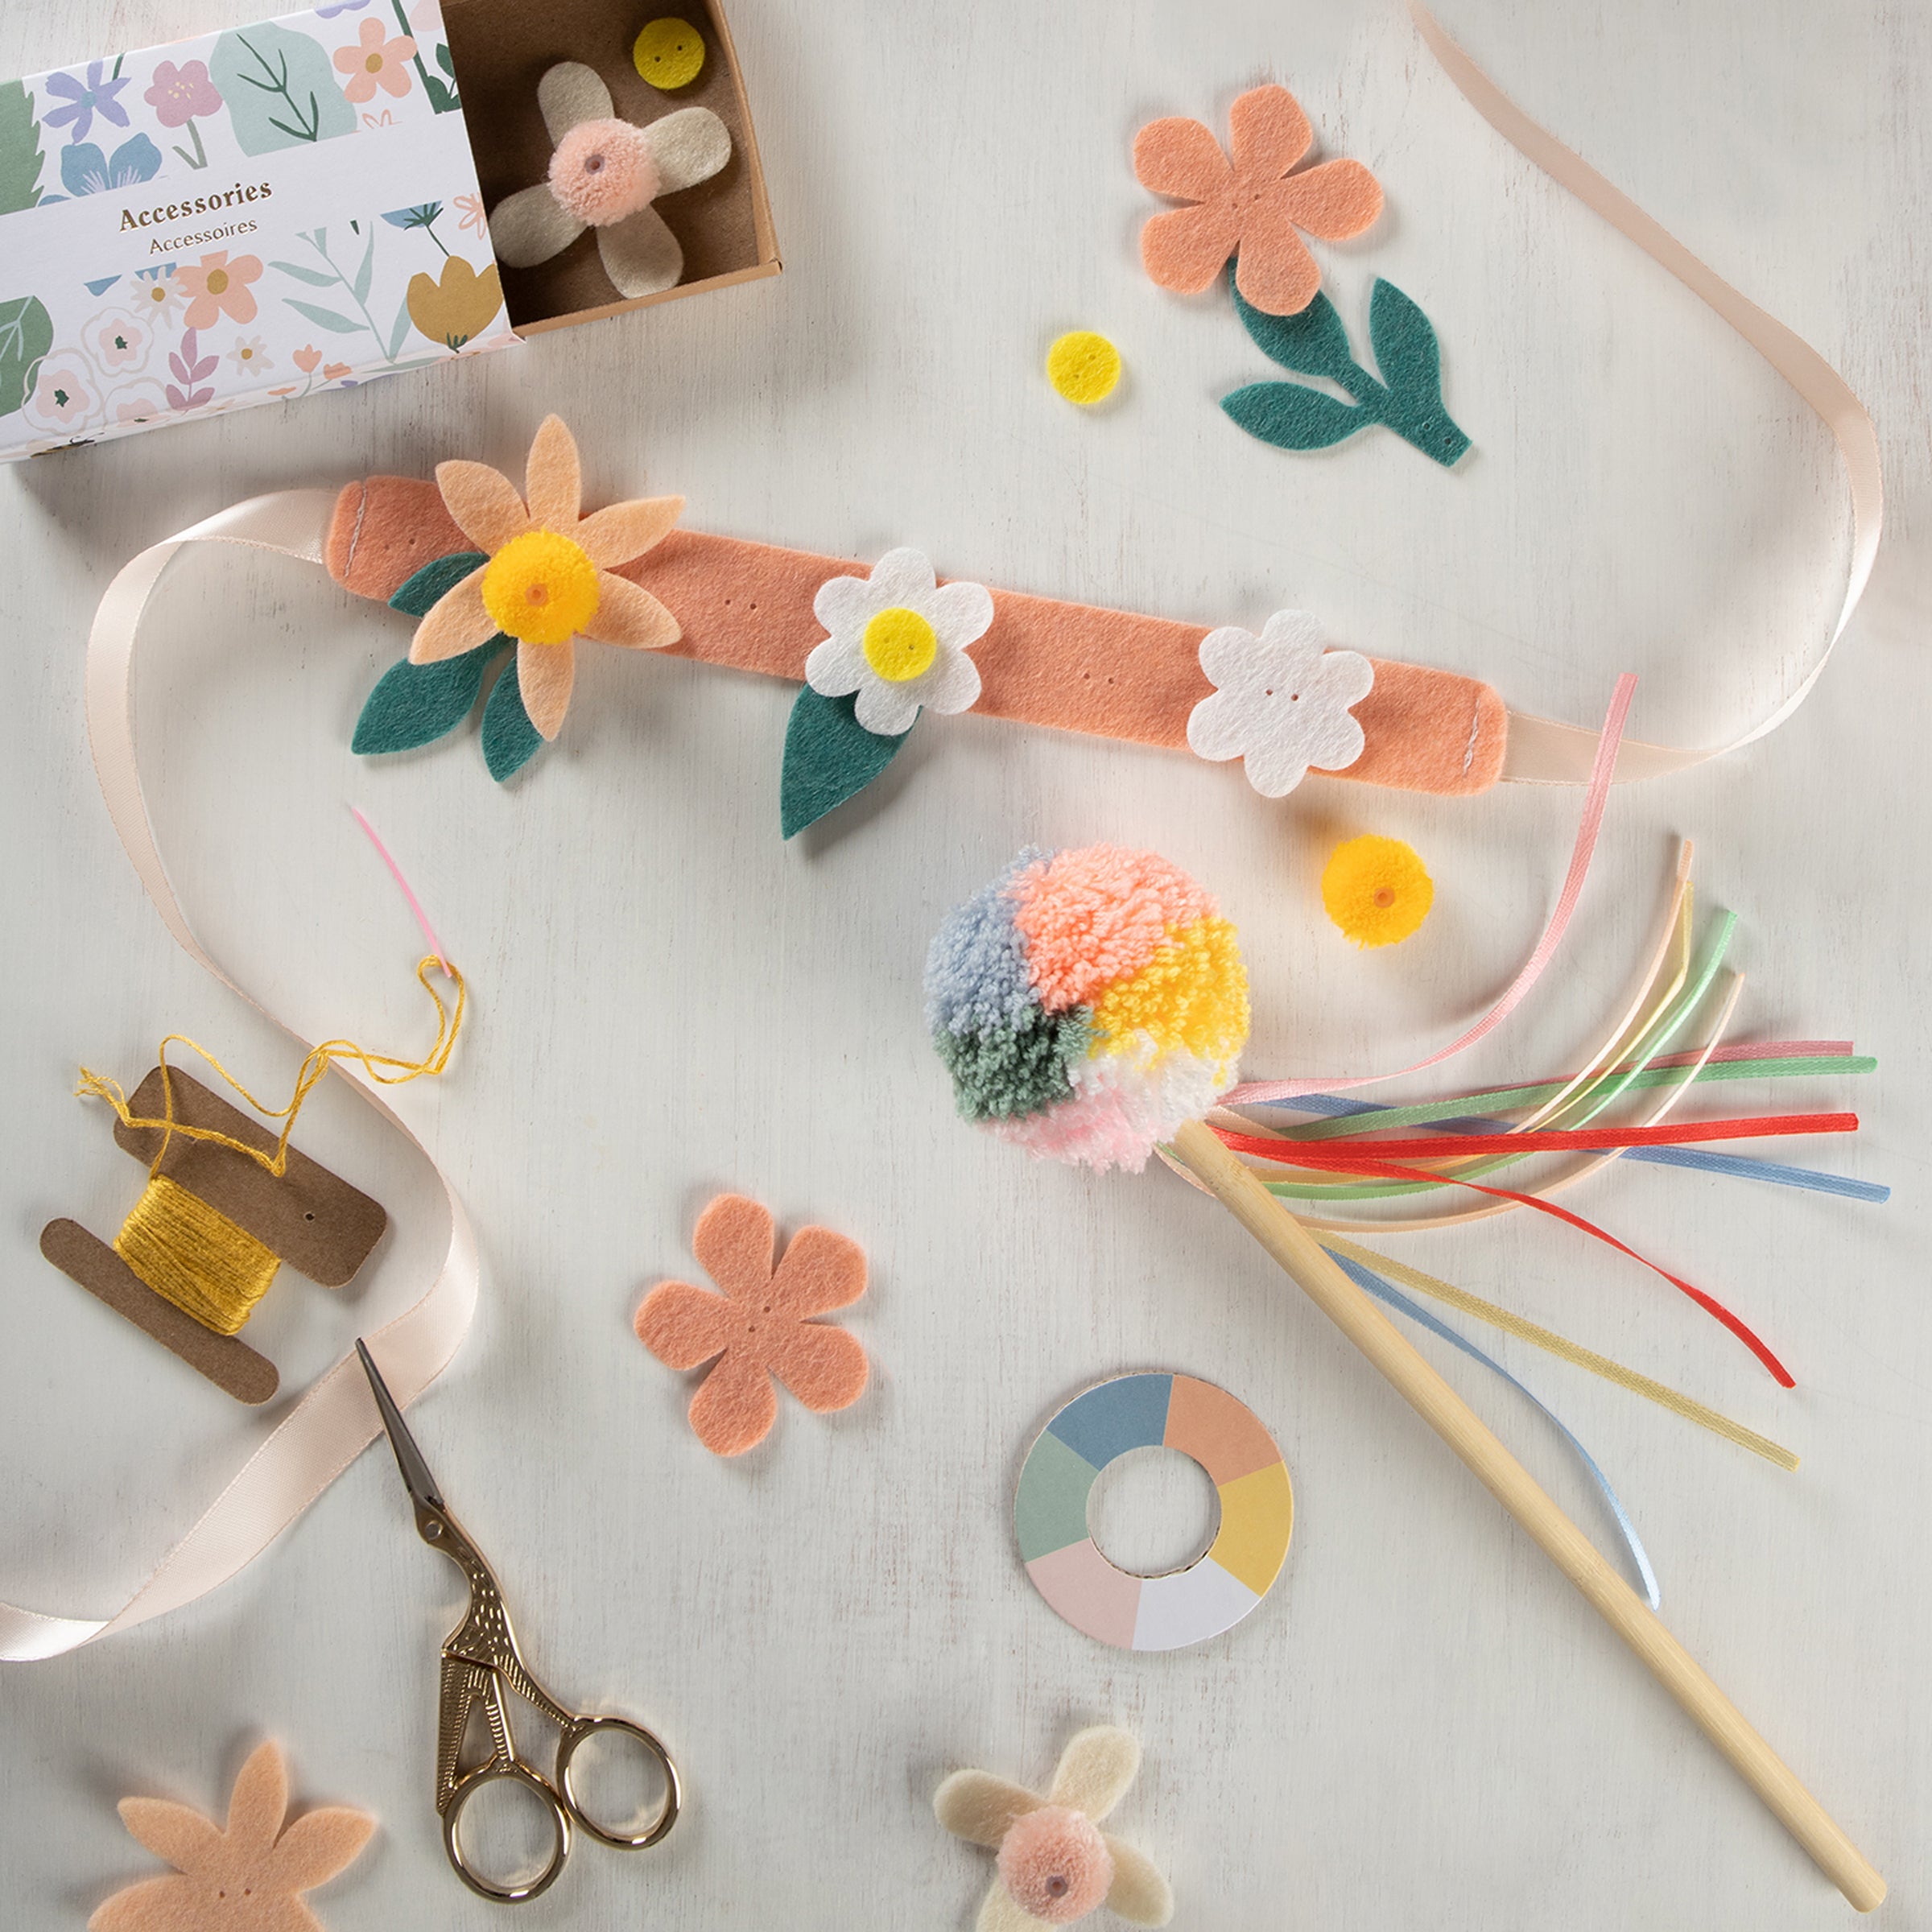 Our fabulous felt crown and fairy wand kit are perfect to wear to a fairy party.